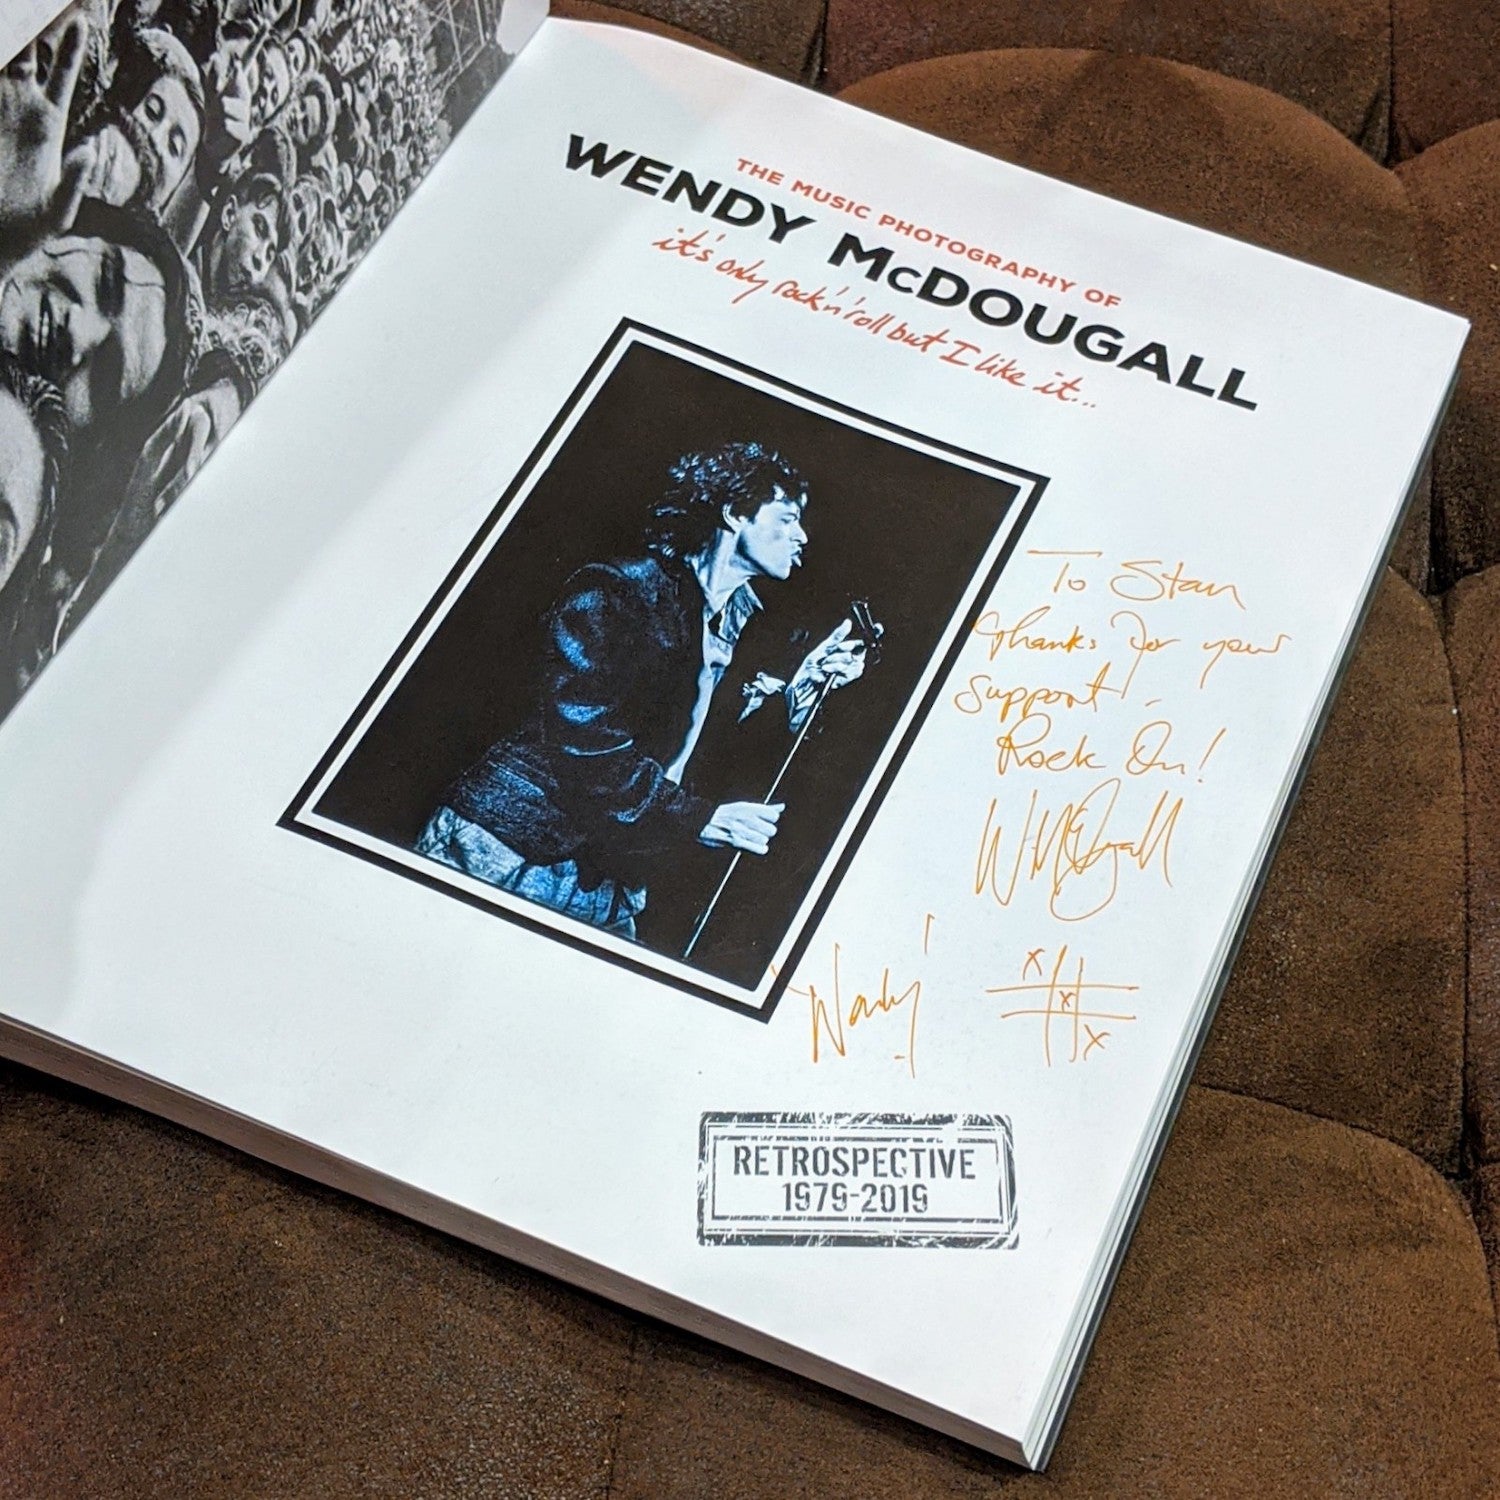 The Music Photography Of Wendy McDougall